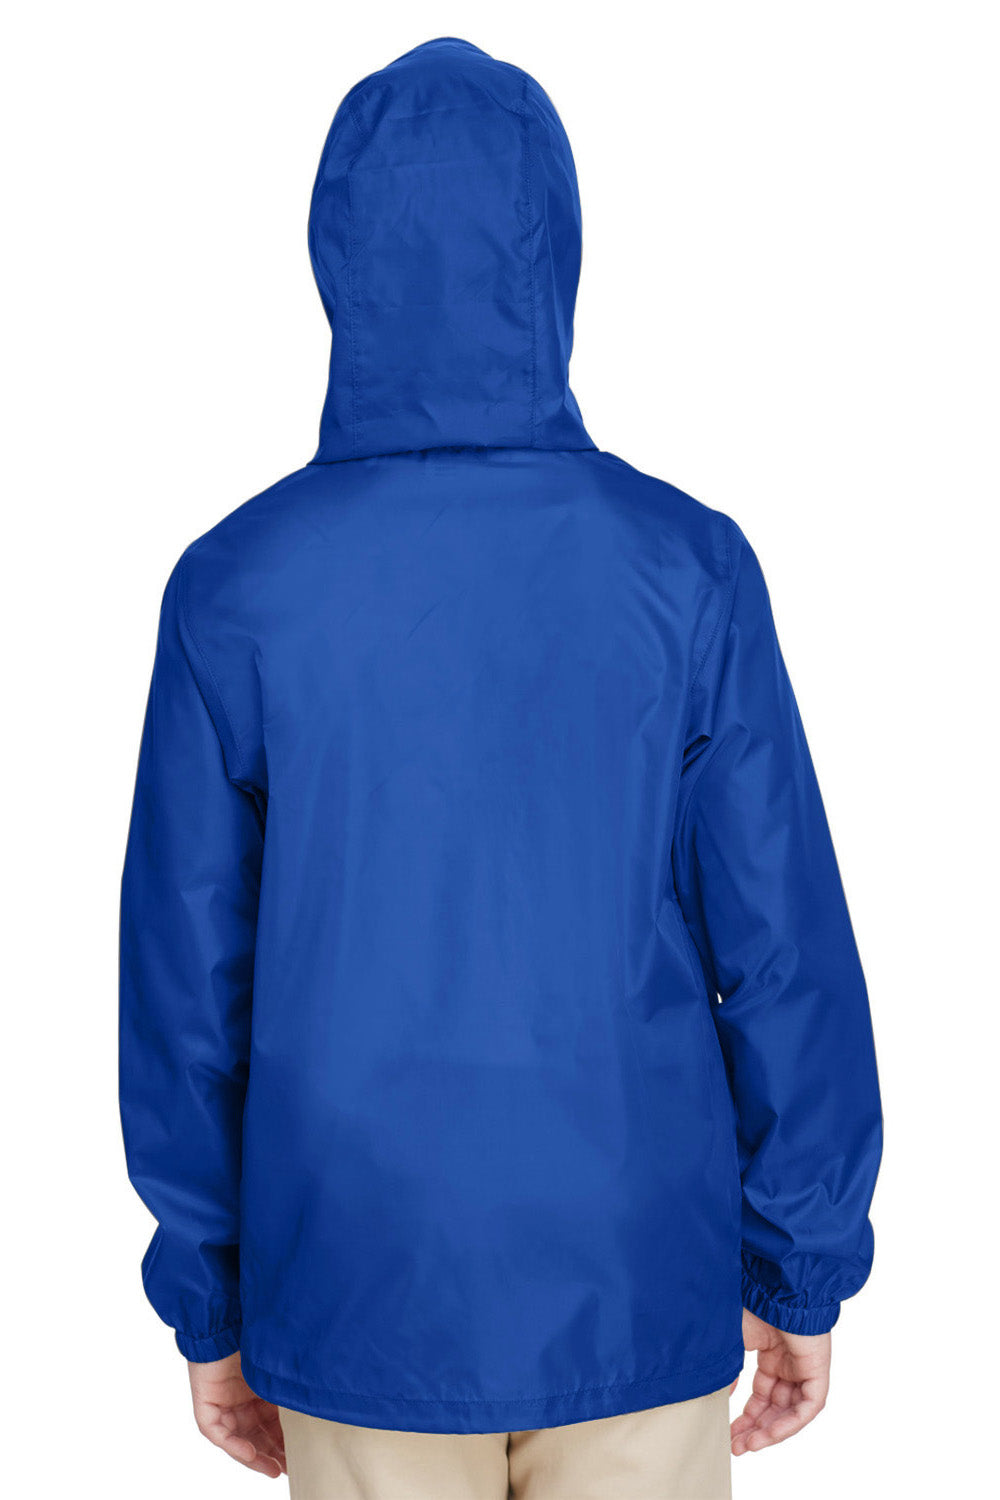 Team 365 TT73Y Youth Zone Protect Water Resistant Full Zip Hooded Jacket Royal Blue Back